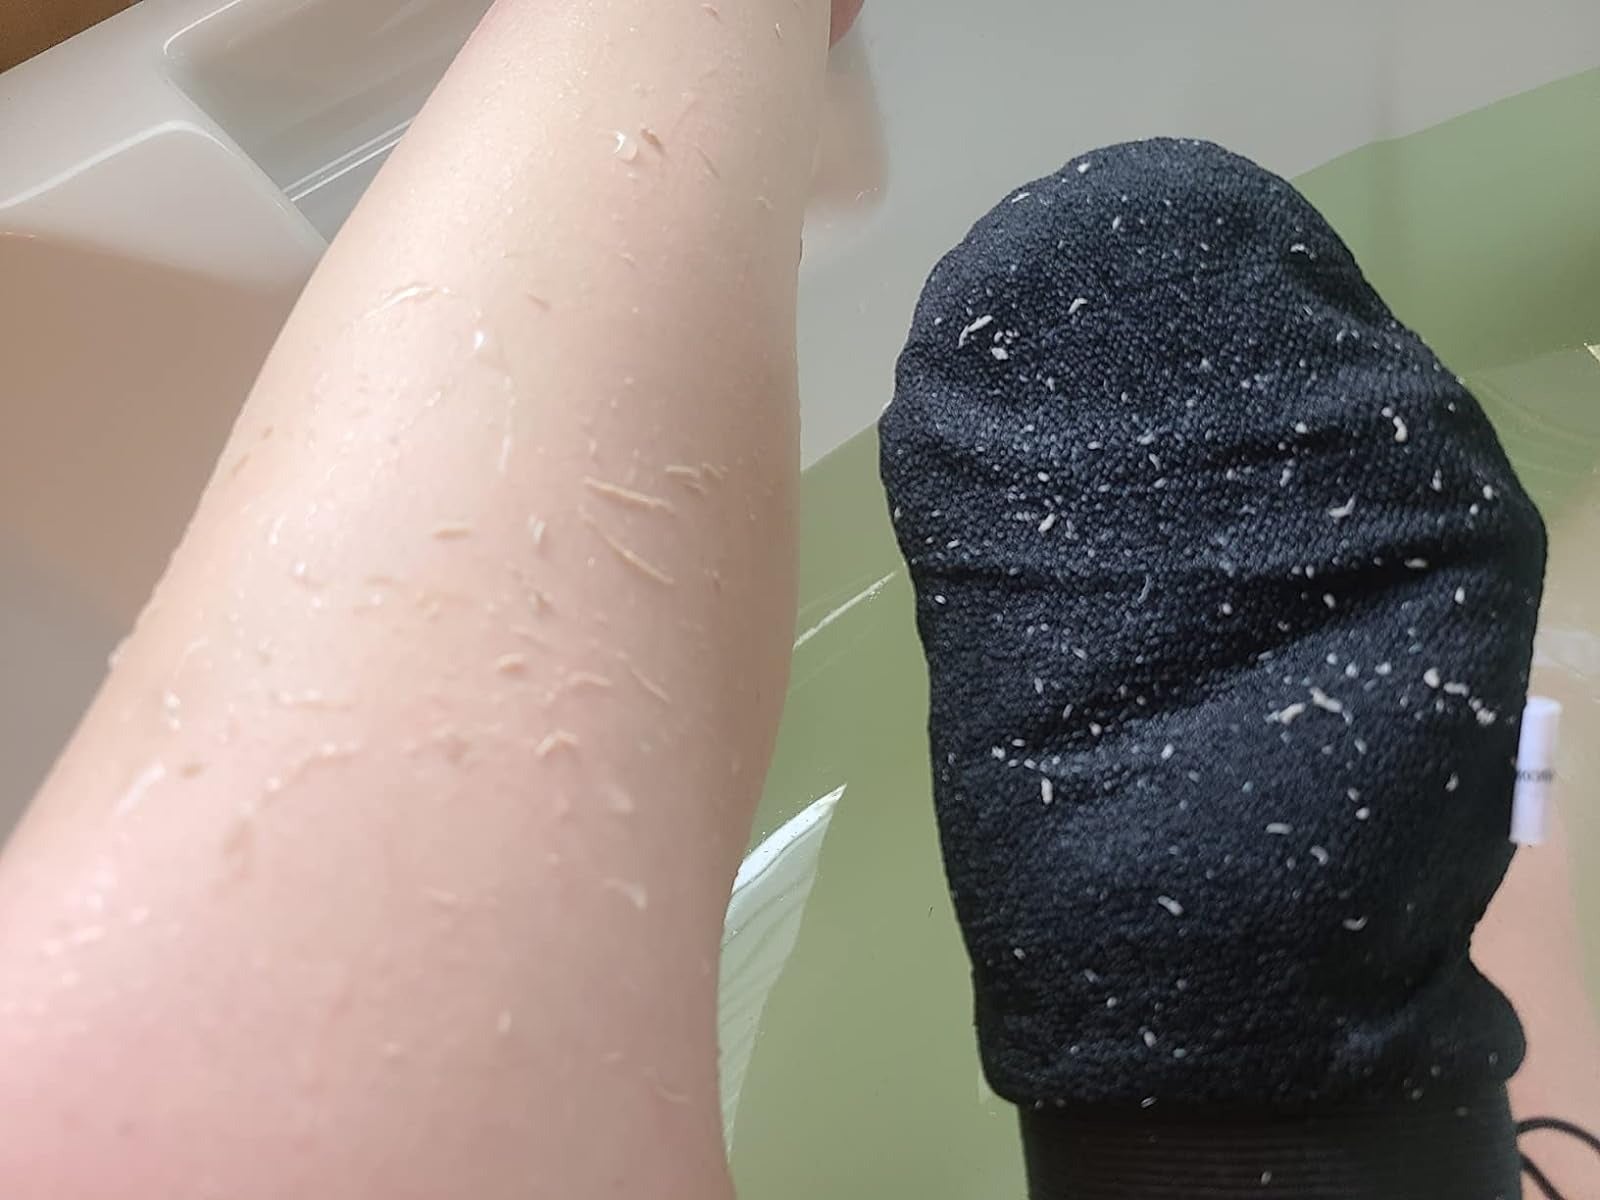 the reviewer removing dead skin with the mitt